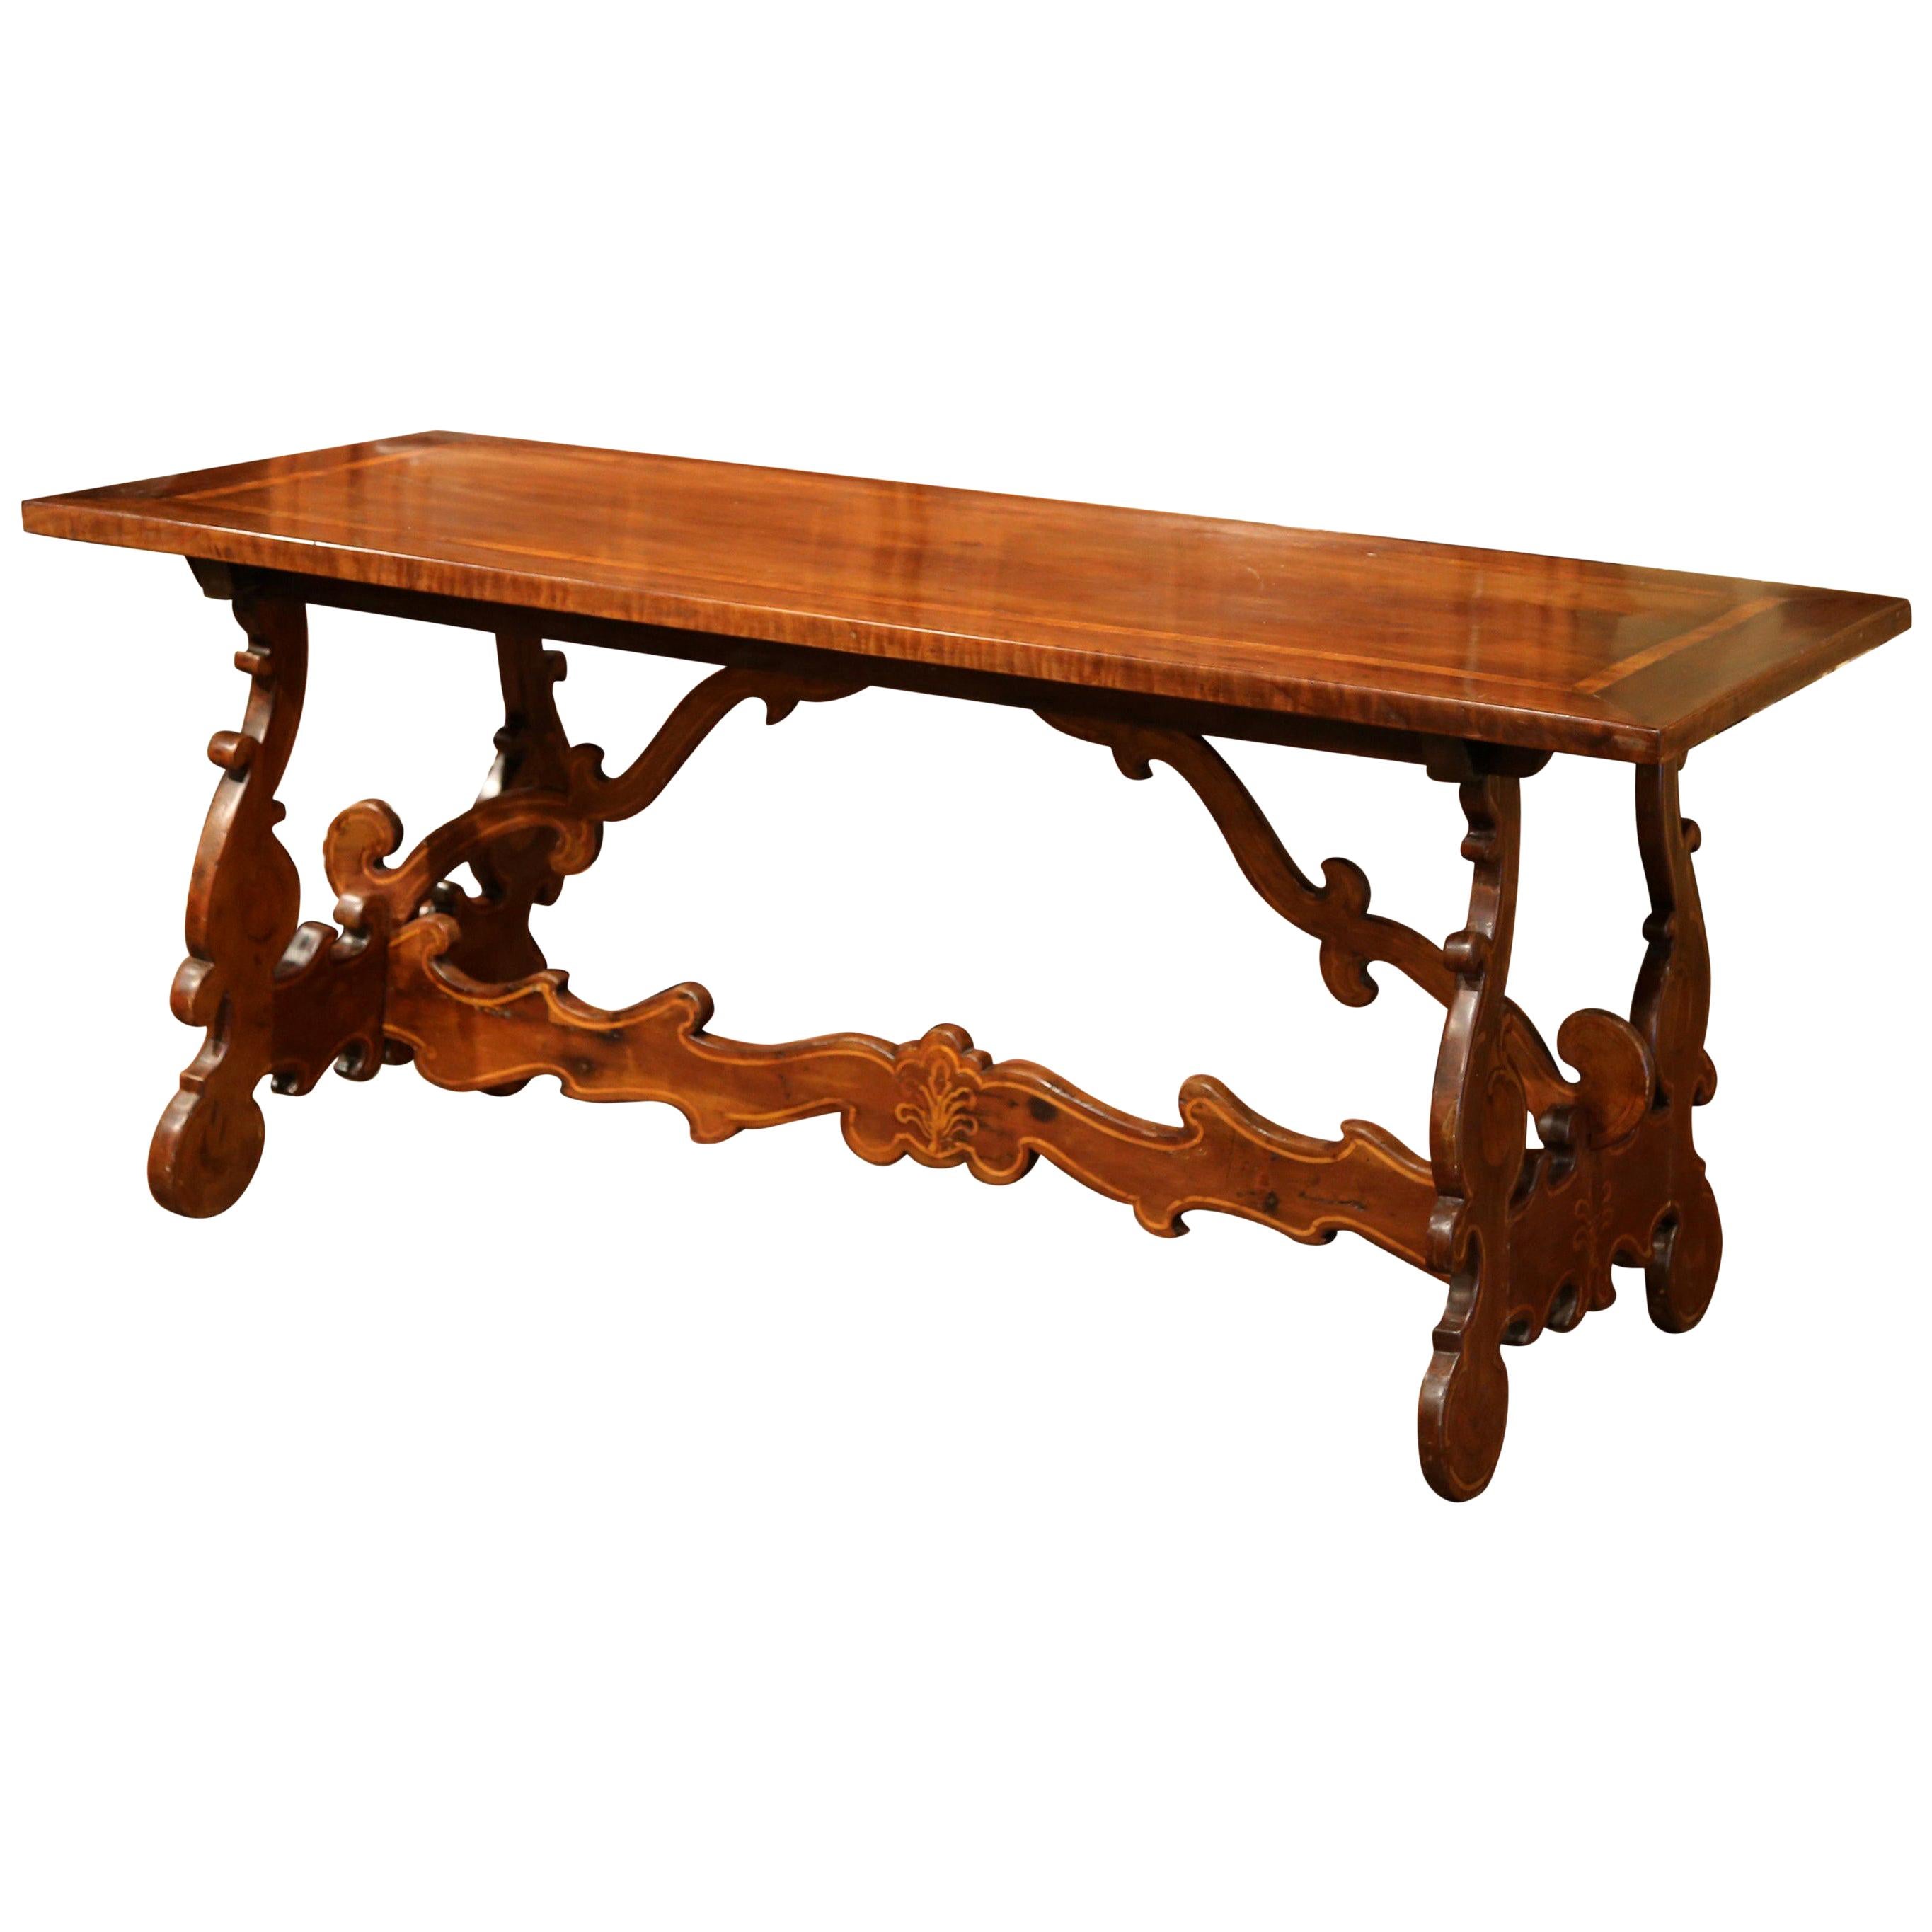 19th Century Italian Carved Walnut Trestle Table with Decorative Inlay Motifs